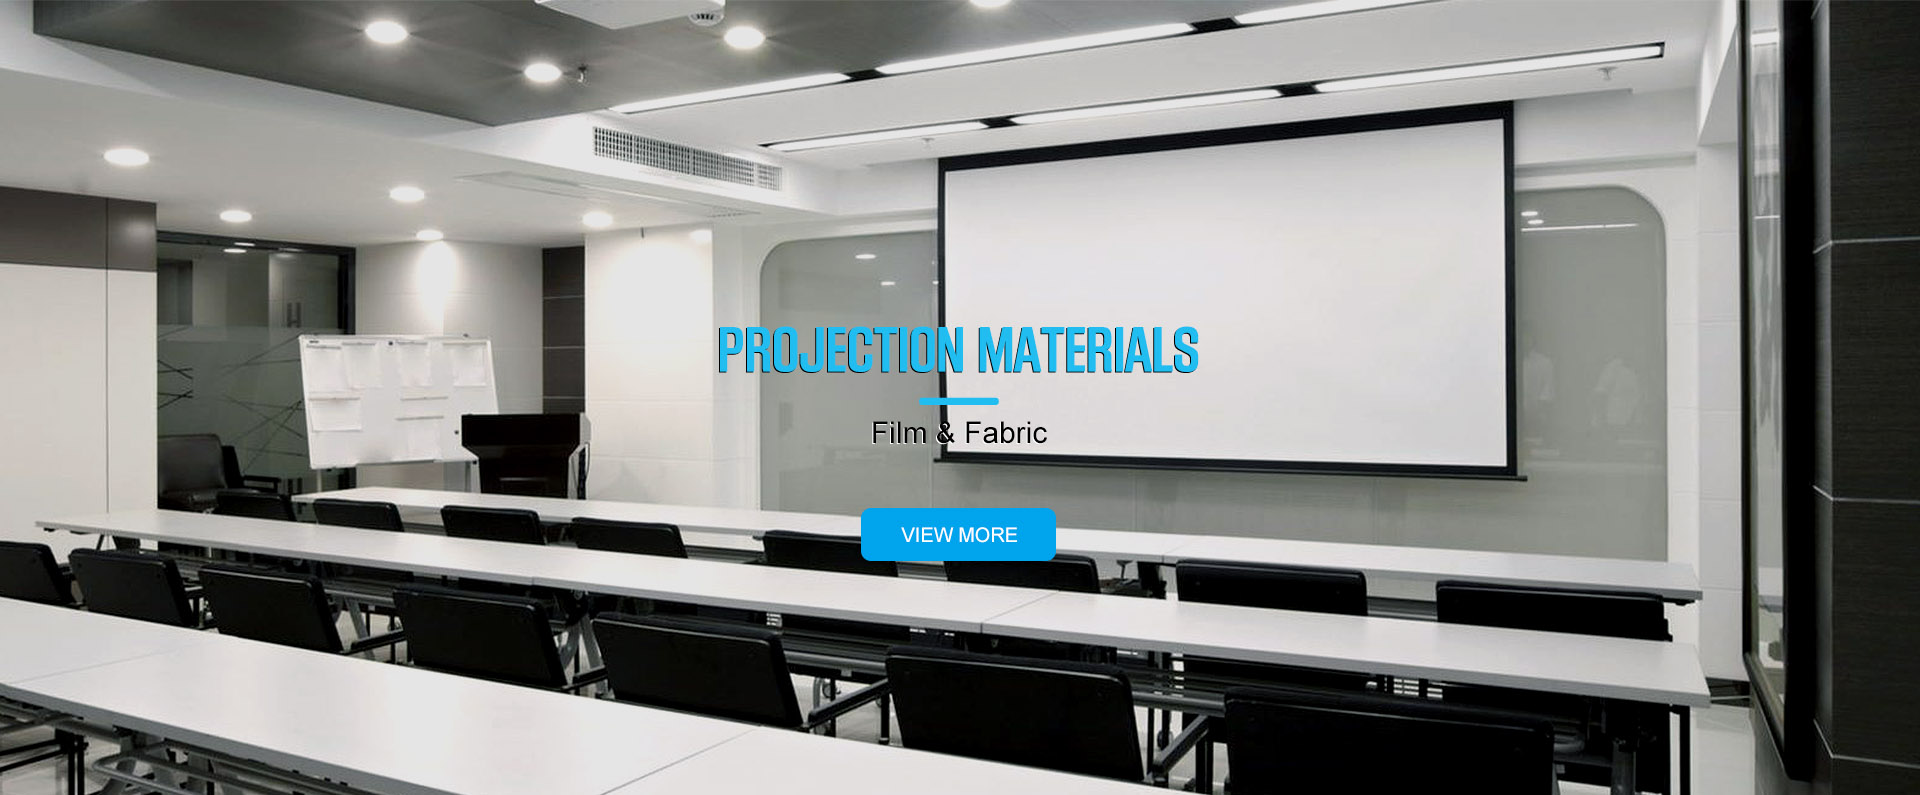 Projection Materials